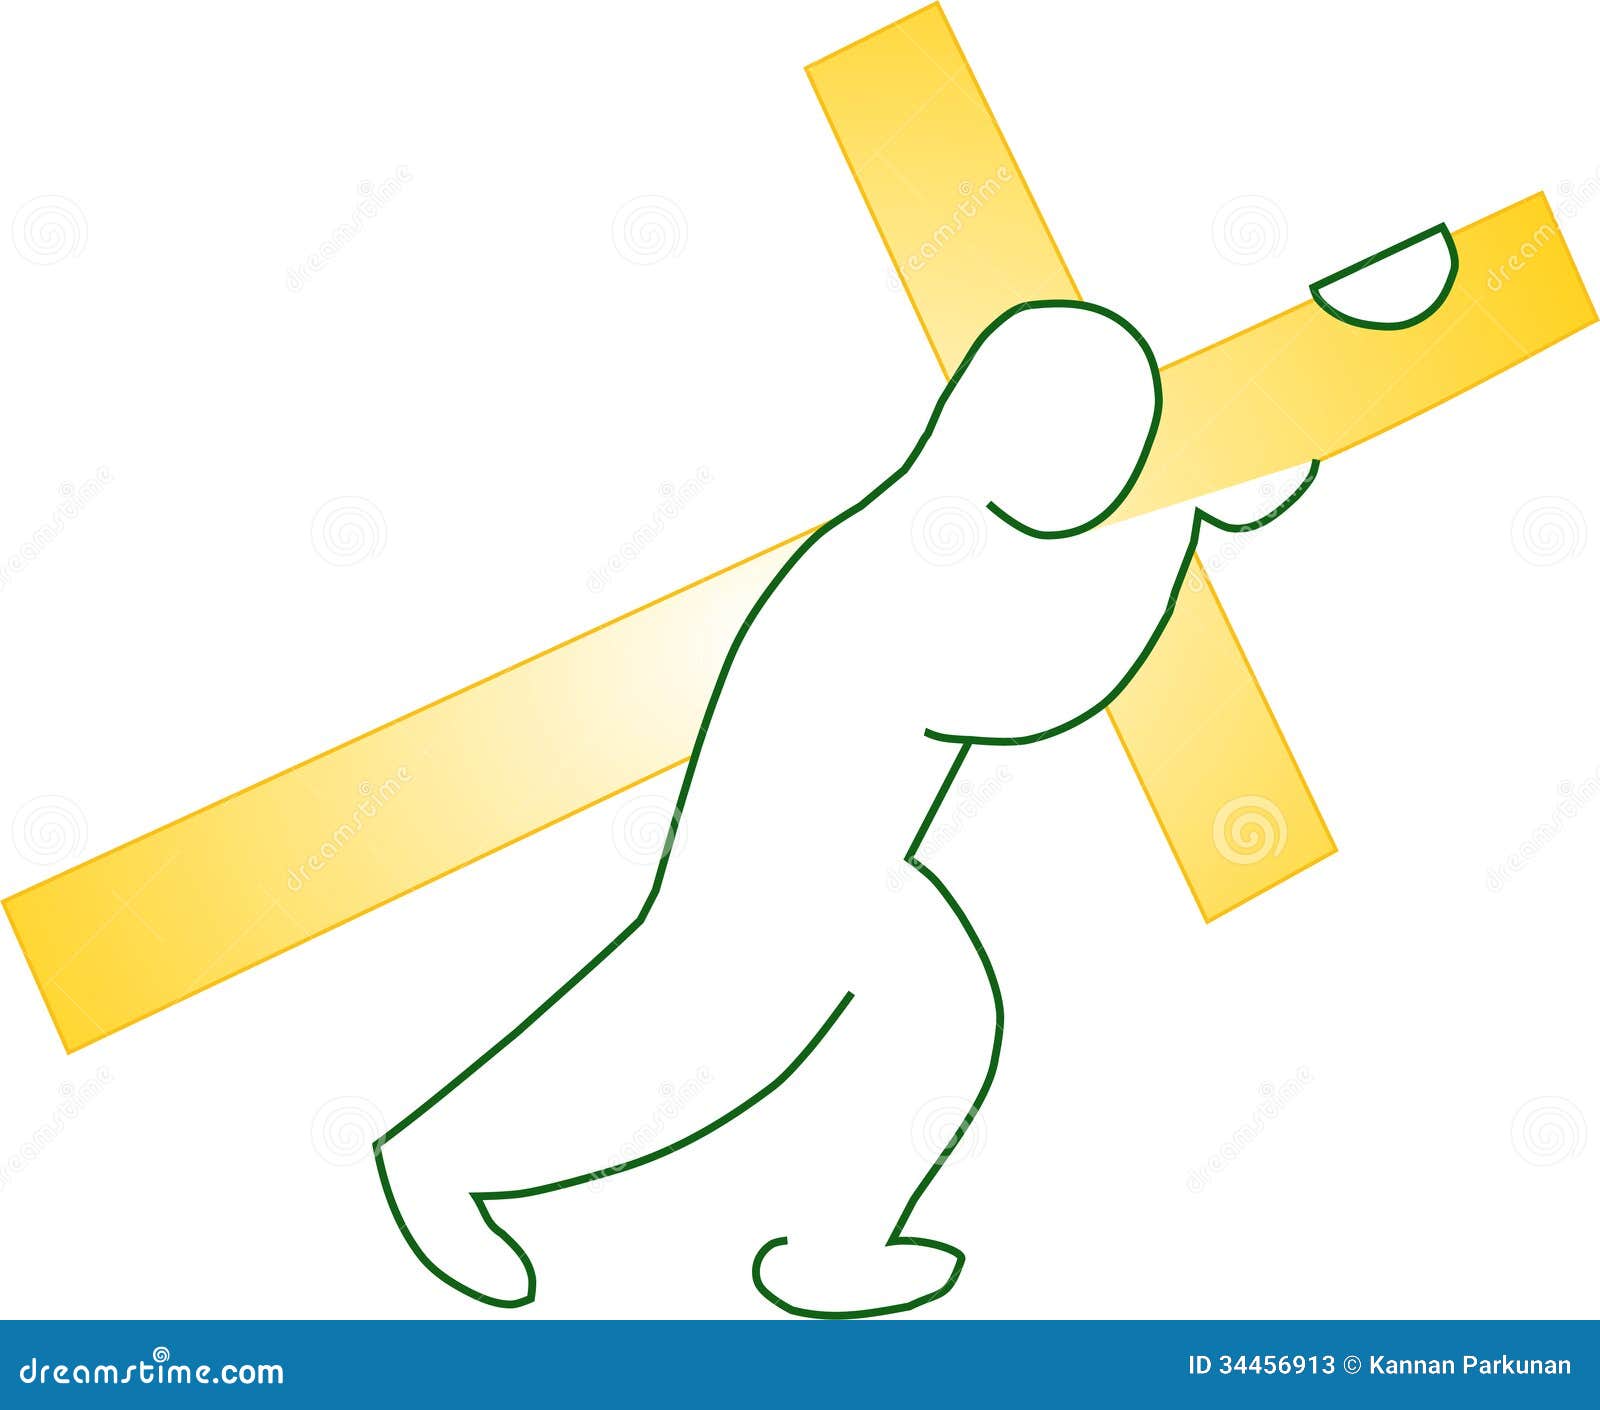 free clipart jesus carrying cross - photo #16